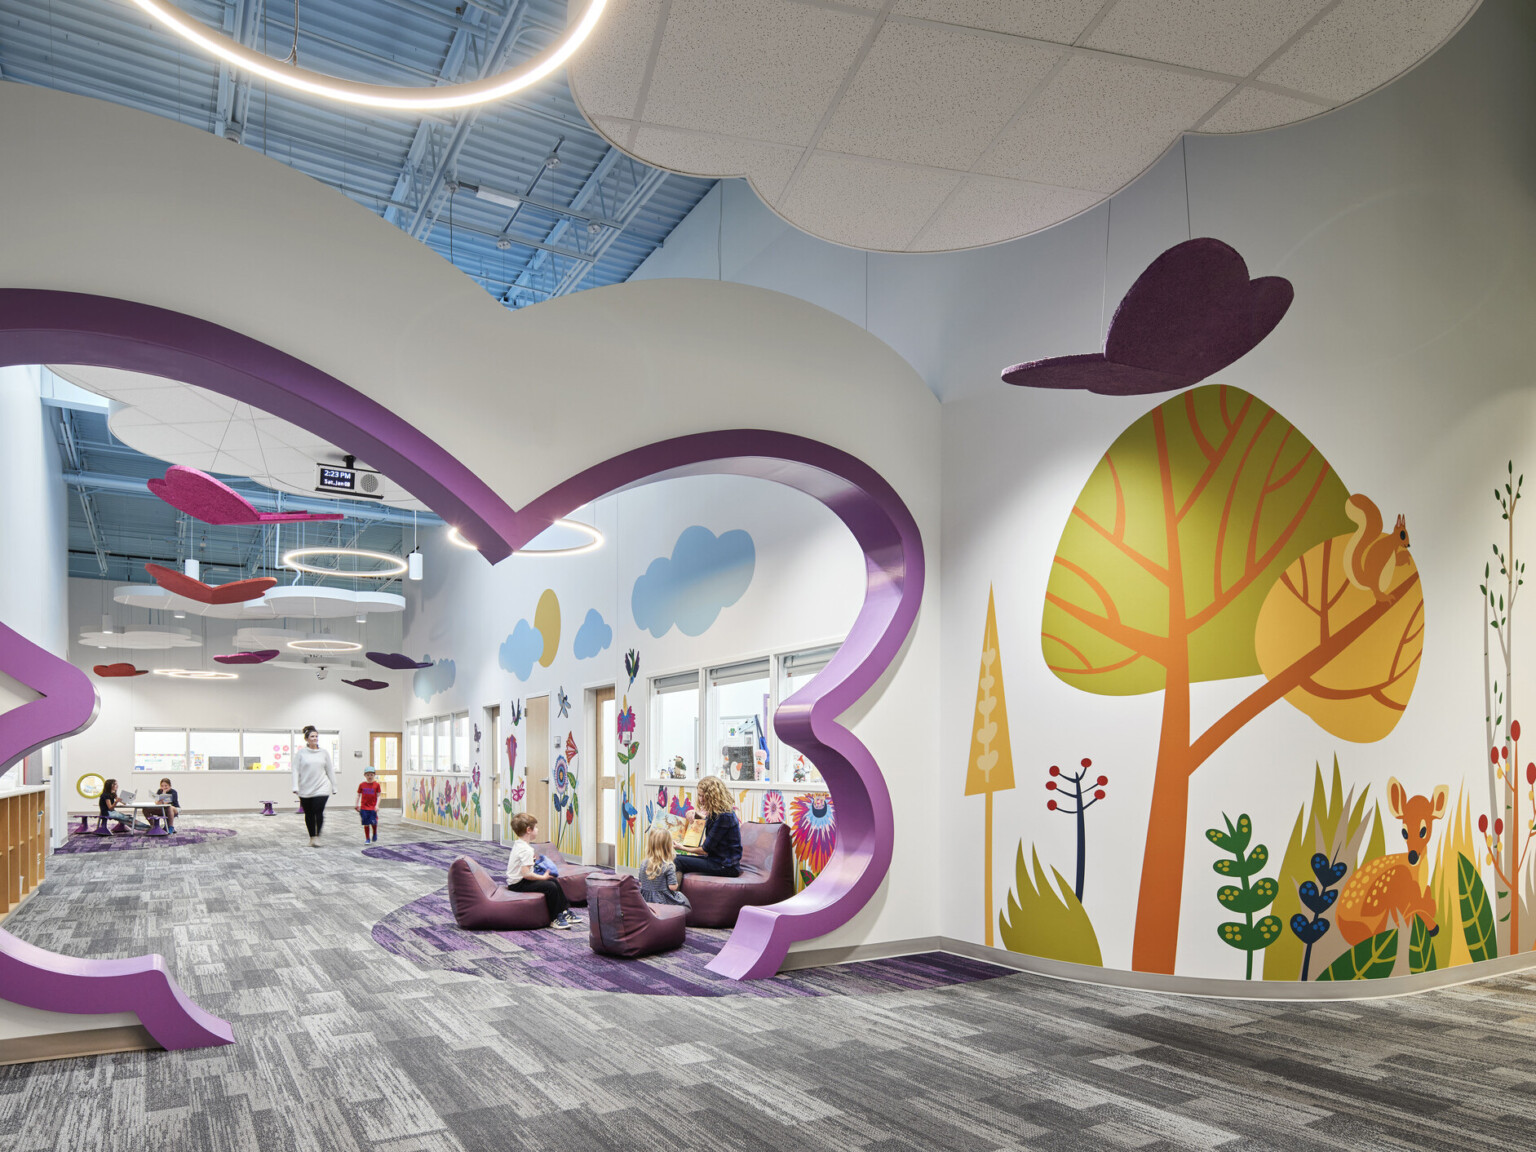 North Kansas City Early Education Center interior hallway with bright mural of trees and abstract-shaped cutout in purple in hall